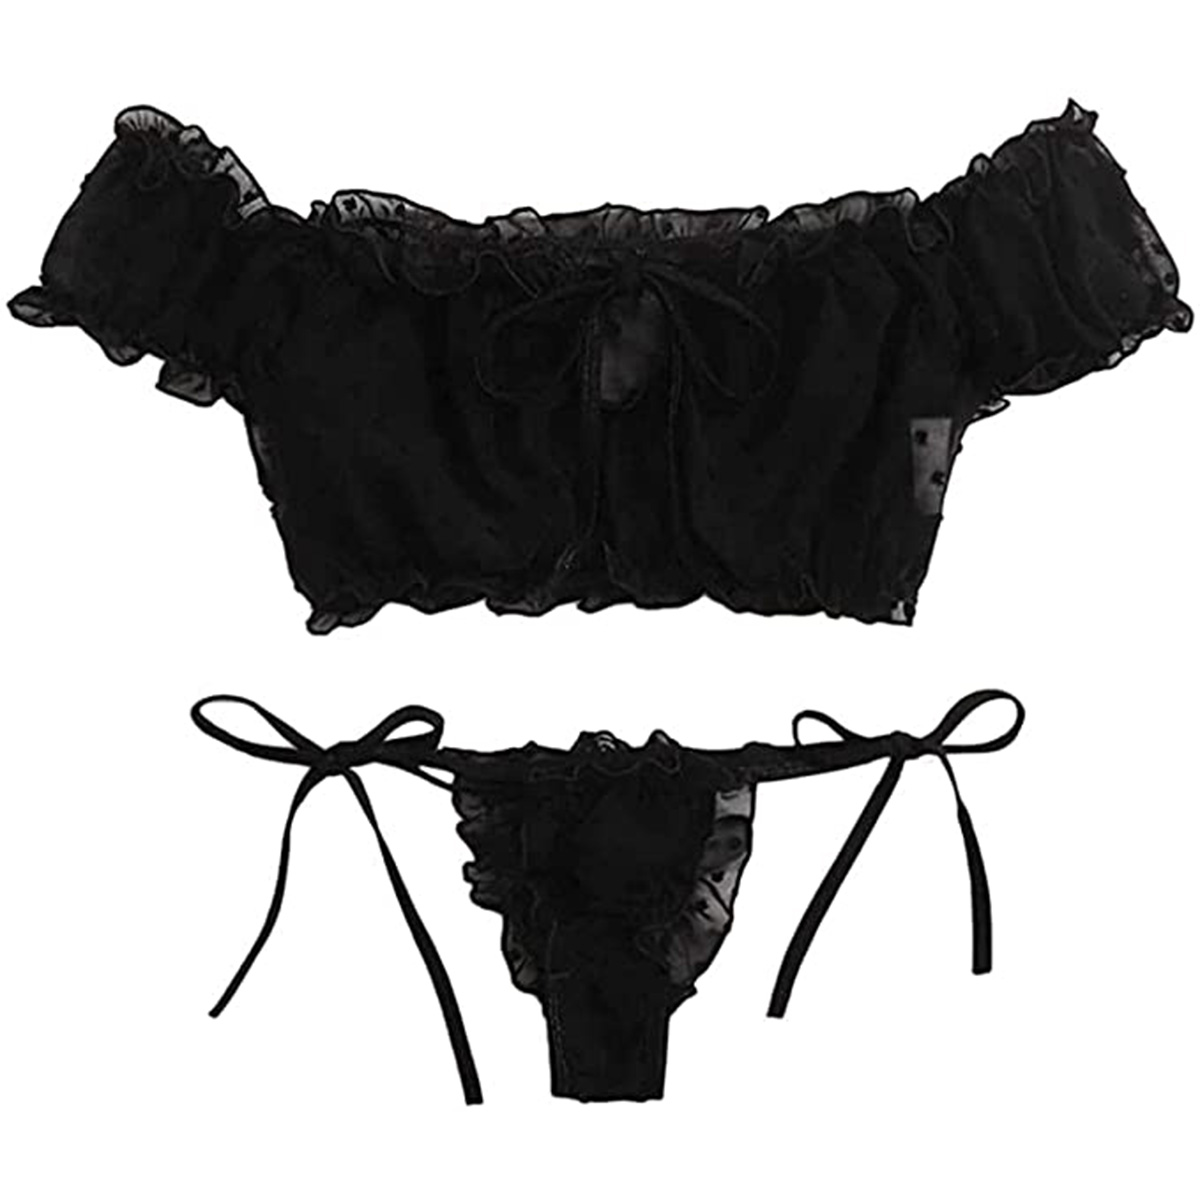 Women Two Pieces Nightwear Set, fashion Off Shoulder Ruffle Trim Lingerie Set Bra and Panty Swimsuits